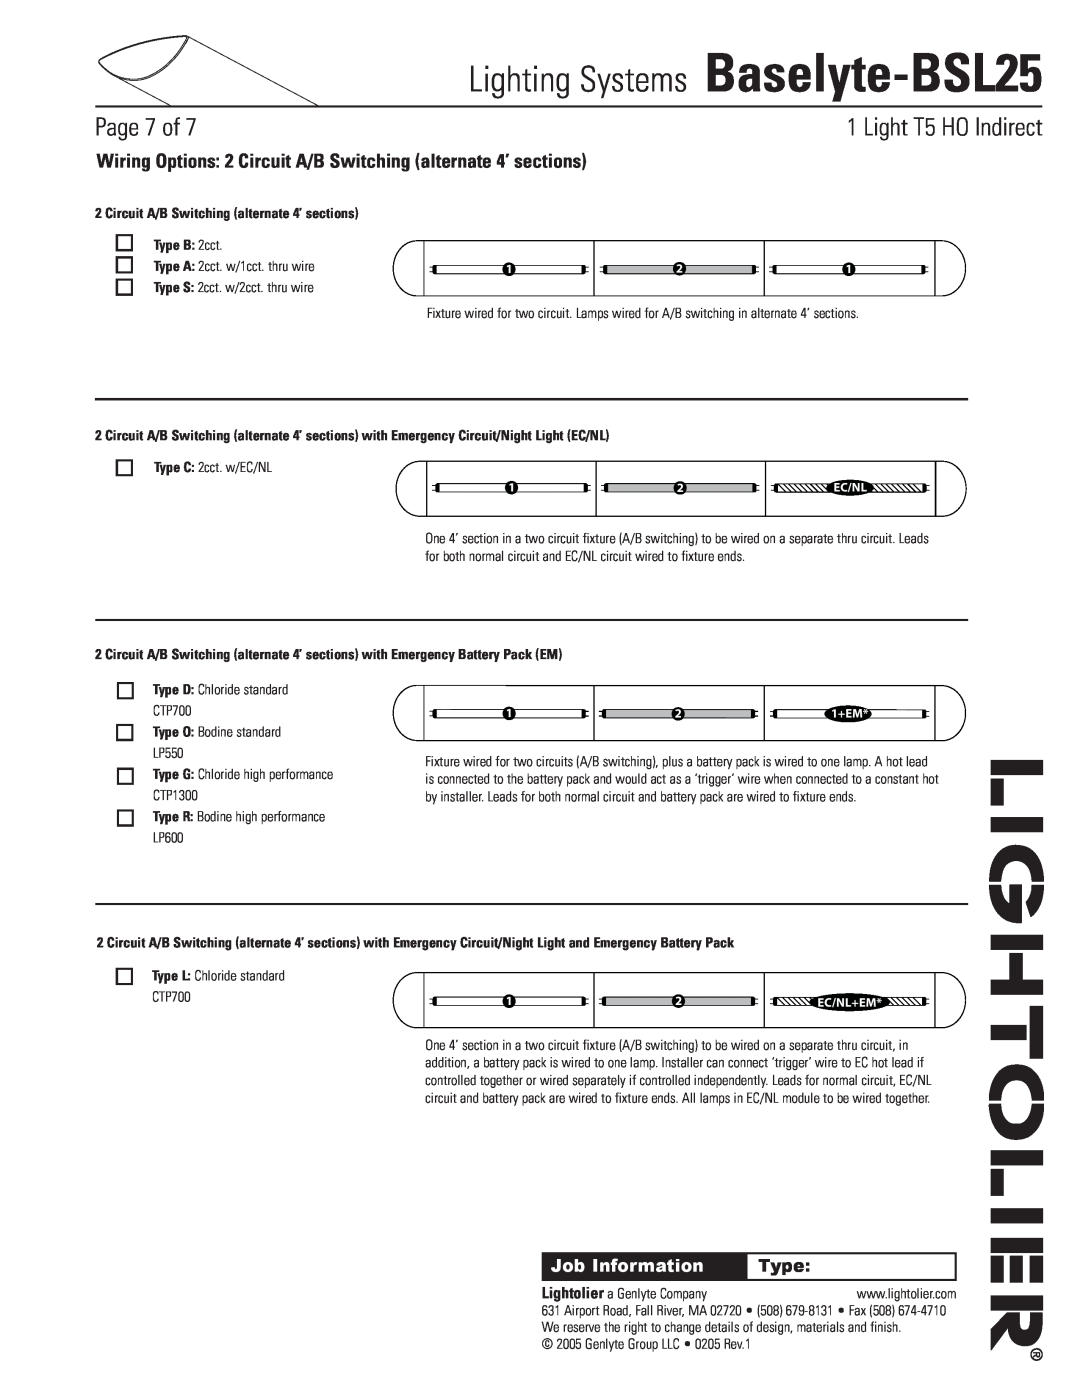 Lightolier Baselyte-BSL25 Circuit A/B Switching alternate 4’ sections, Type B: 2cct, Type O: Bodine standard LP550 